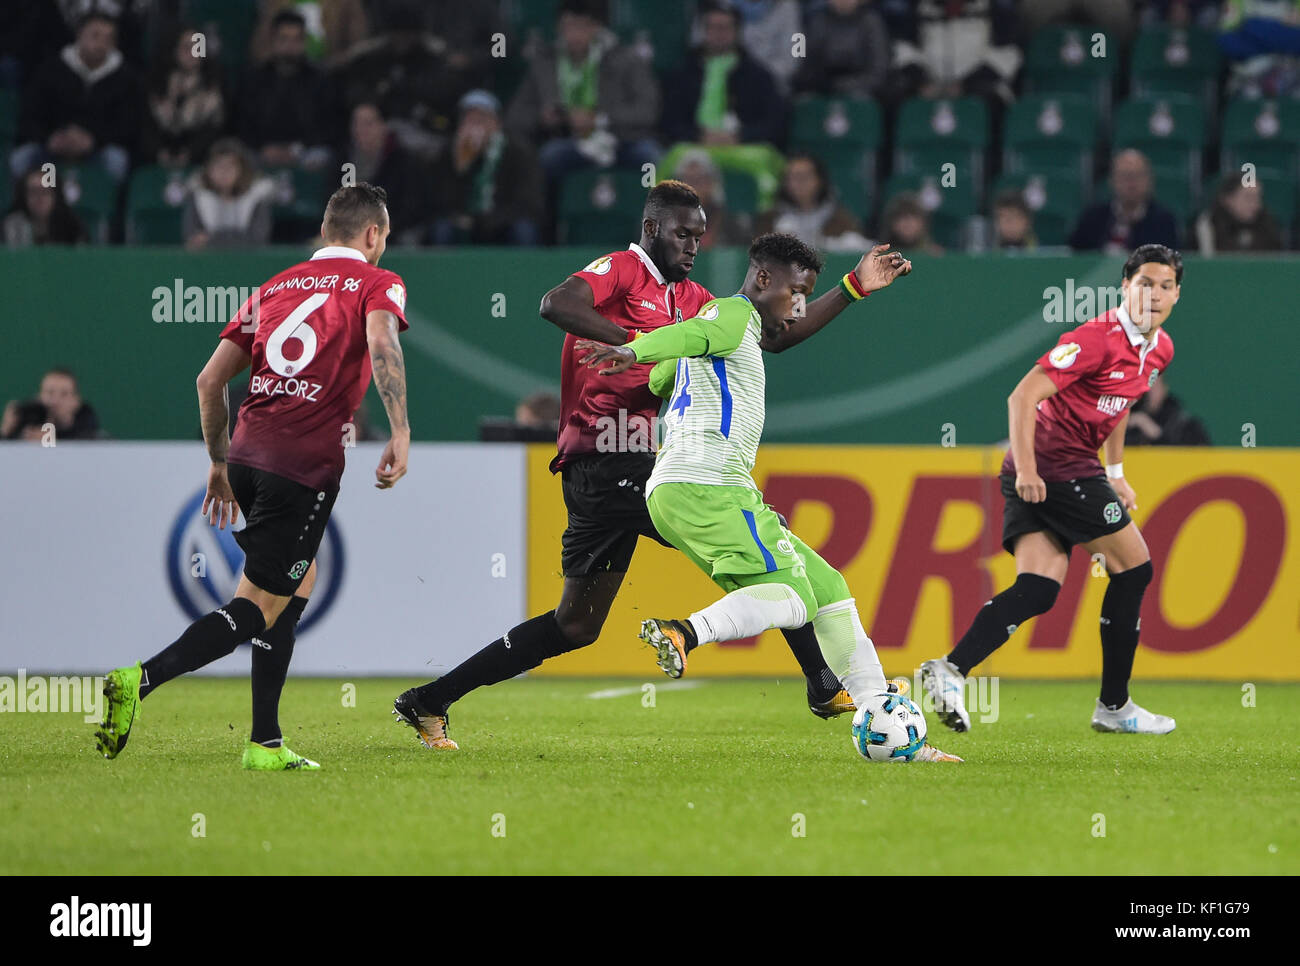 Wolfsburg's Divock Origi (2nd from right) and Hannover's Salif Sane (2nd from left) vying for the ball while to the left stand Hannover's Marvin Bakalorz and Miiko Albornoz (R) during the DFB Cup soccer match between VfL Wolfsburg and Hannover 96 in the Volkswagen Arena in Wolfsburg, Germany, 25 October 2017. (EMBARGO CONDITIONS - ATTENTION: The DFB prohibits the utilisation and publication of sequential pictures on the internet and other online media during the match (including half-time). ATTENTION: BLOCKING PERIOD! The DFB permits the further utilisation and publication of the pictures f Stock Photo